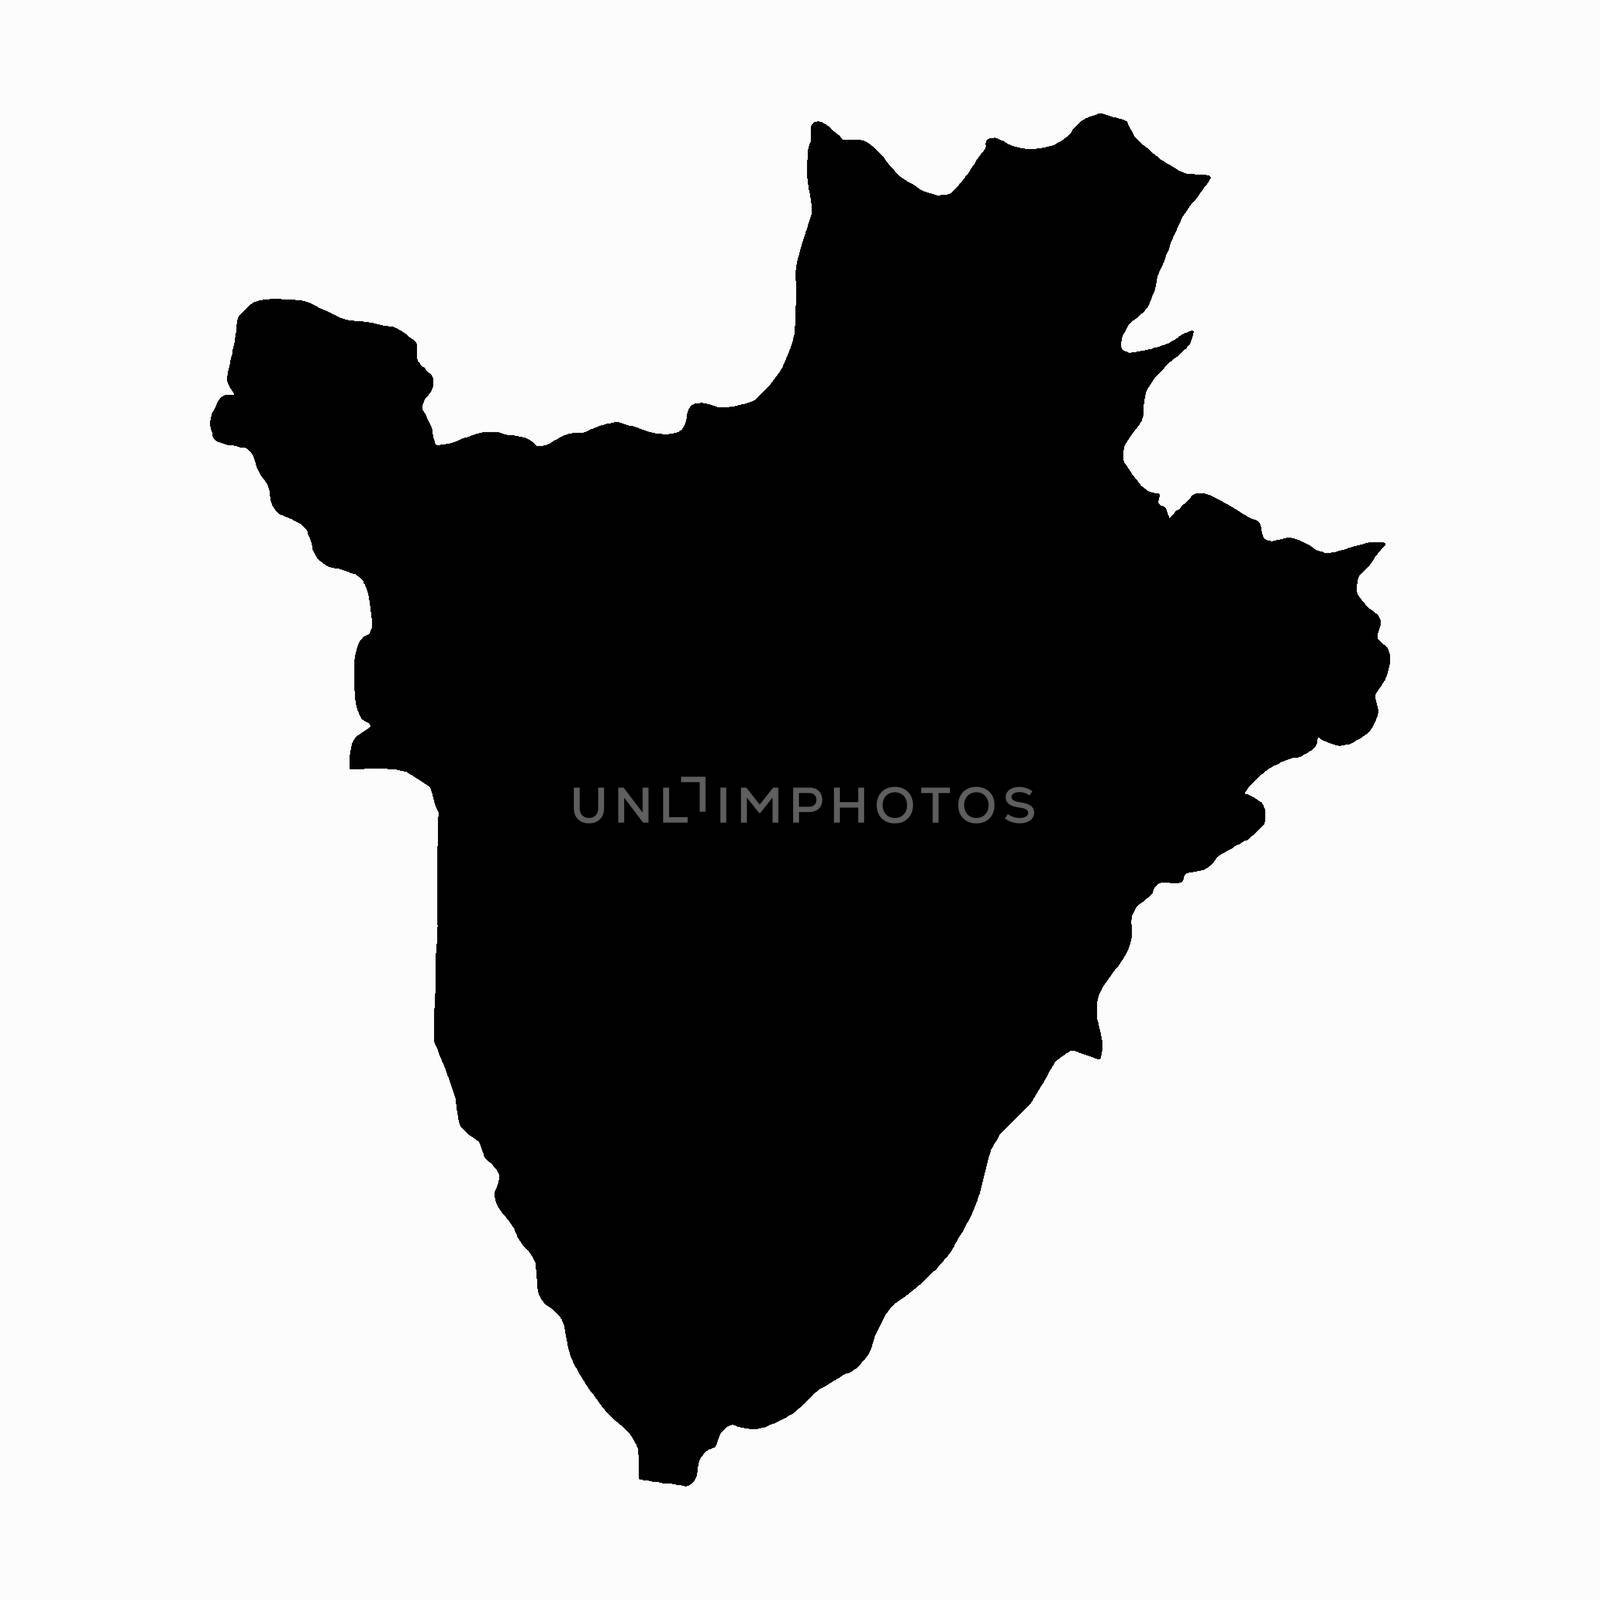 Burundi outline silhouette map in black over a white background